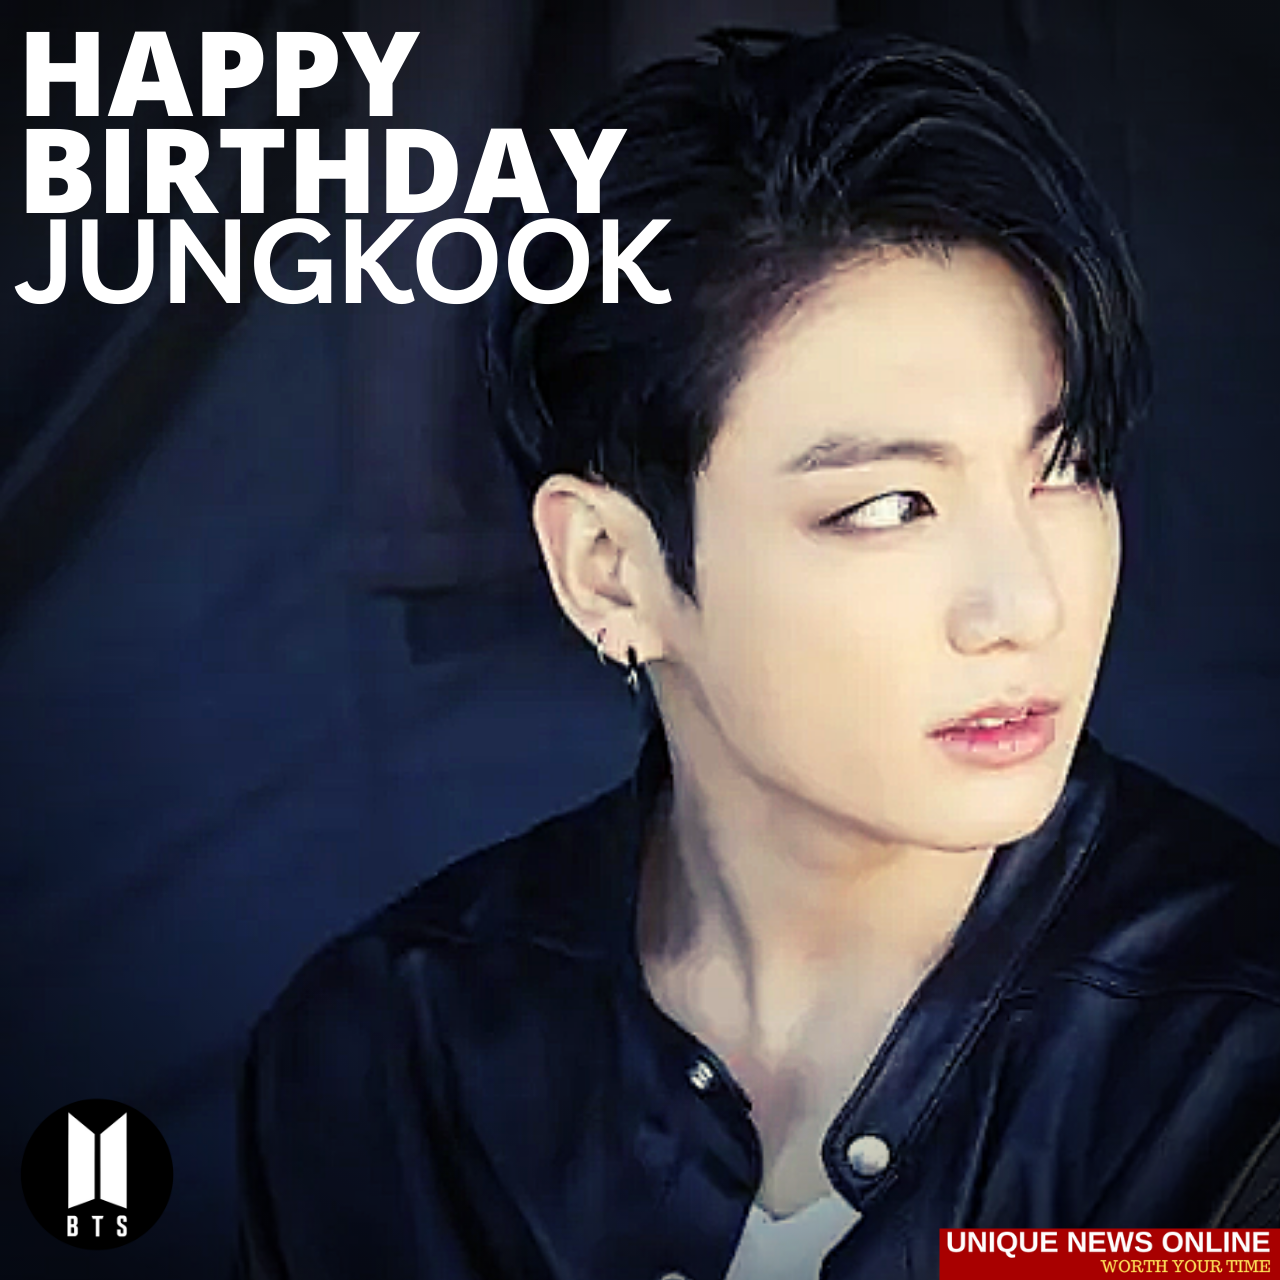 Happy Birthday Jungkook Wishes, Images, Messages, Status and Quotes to greet BTS Member